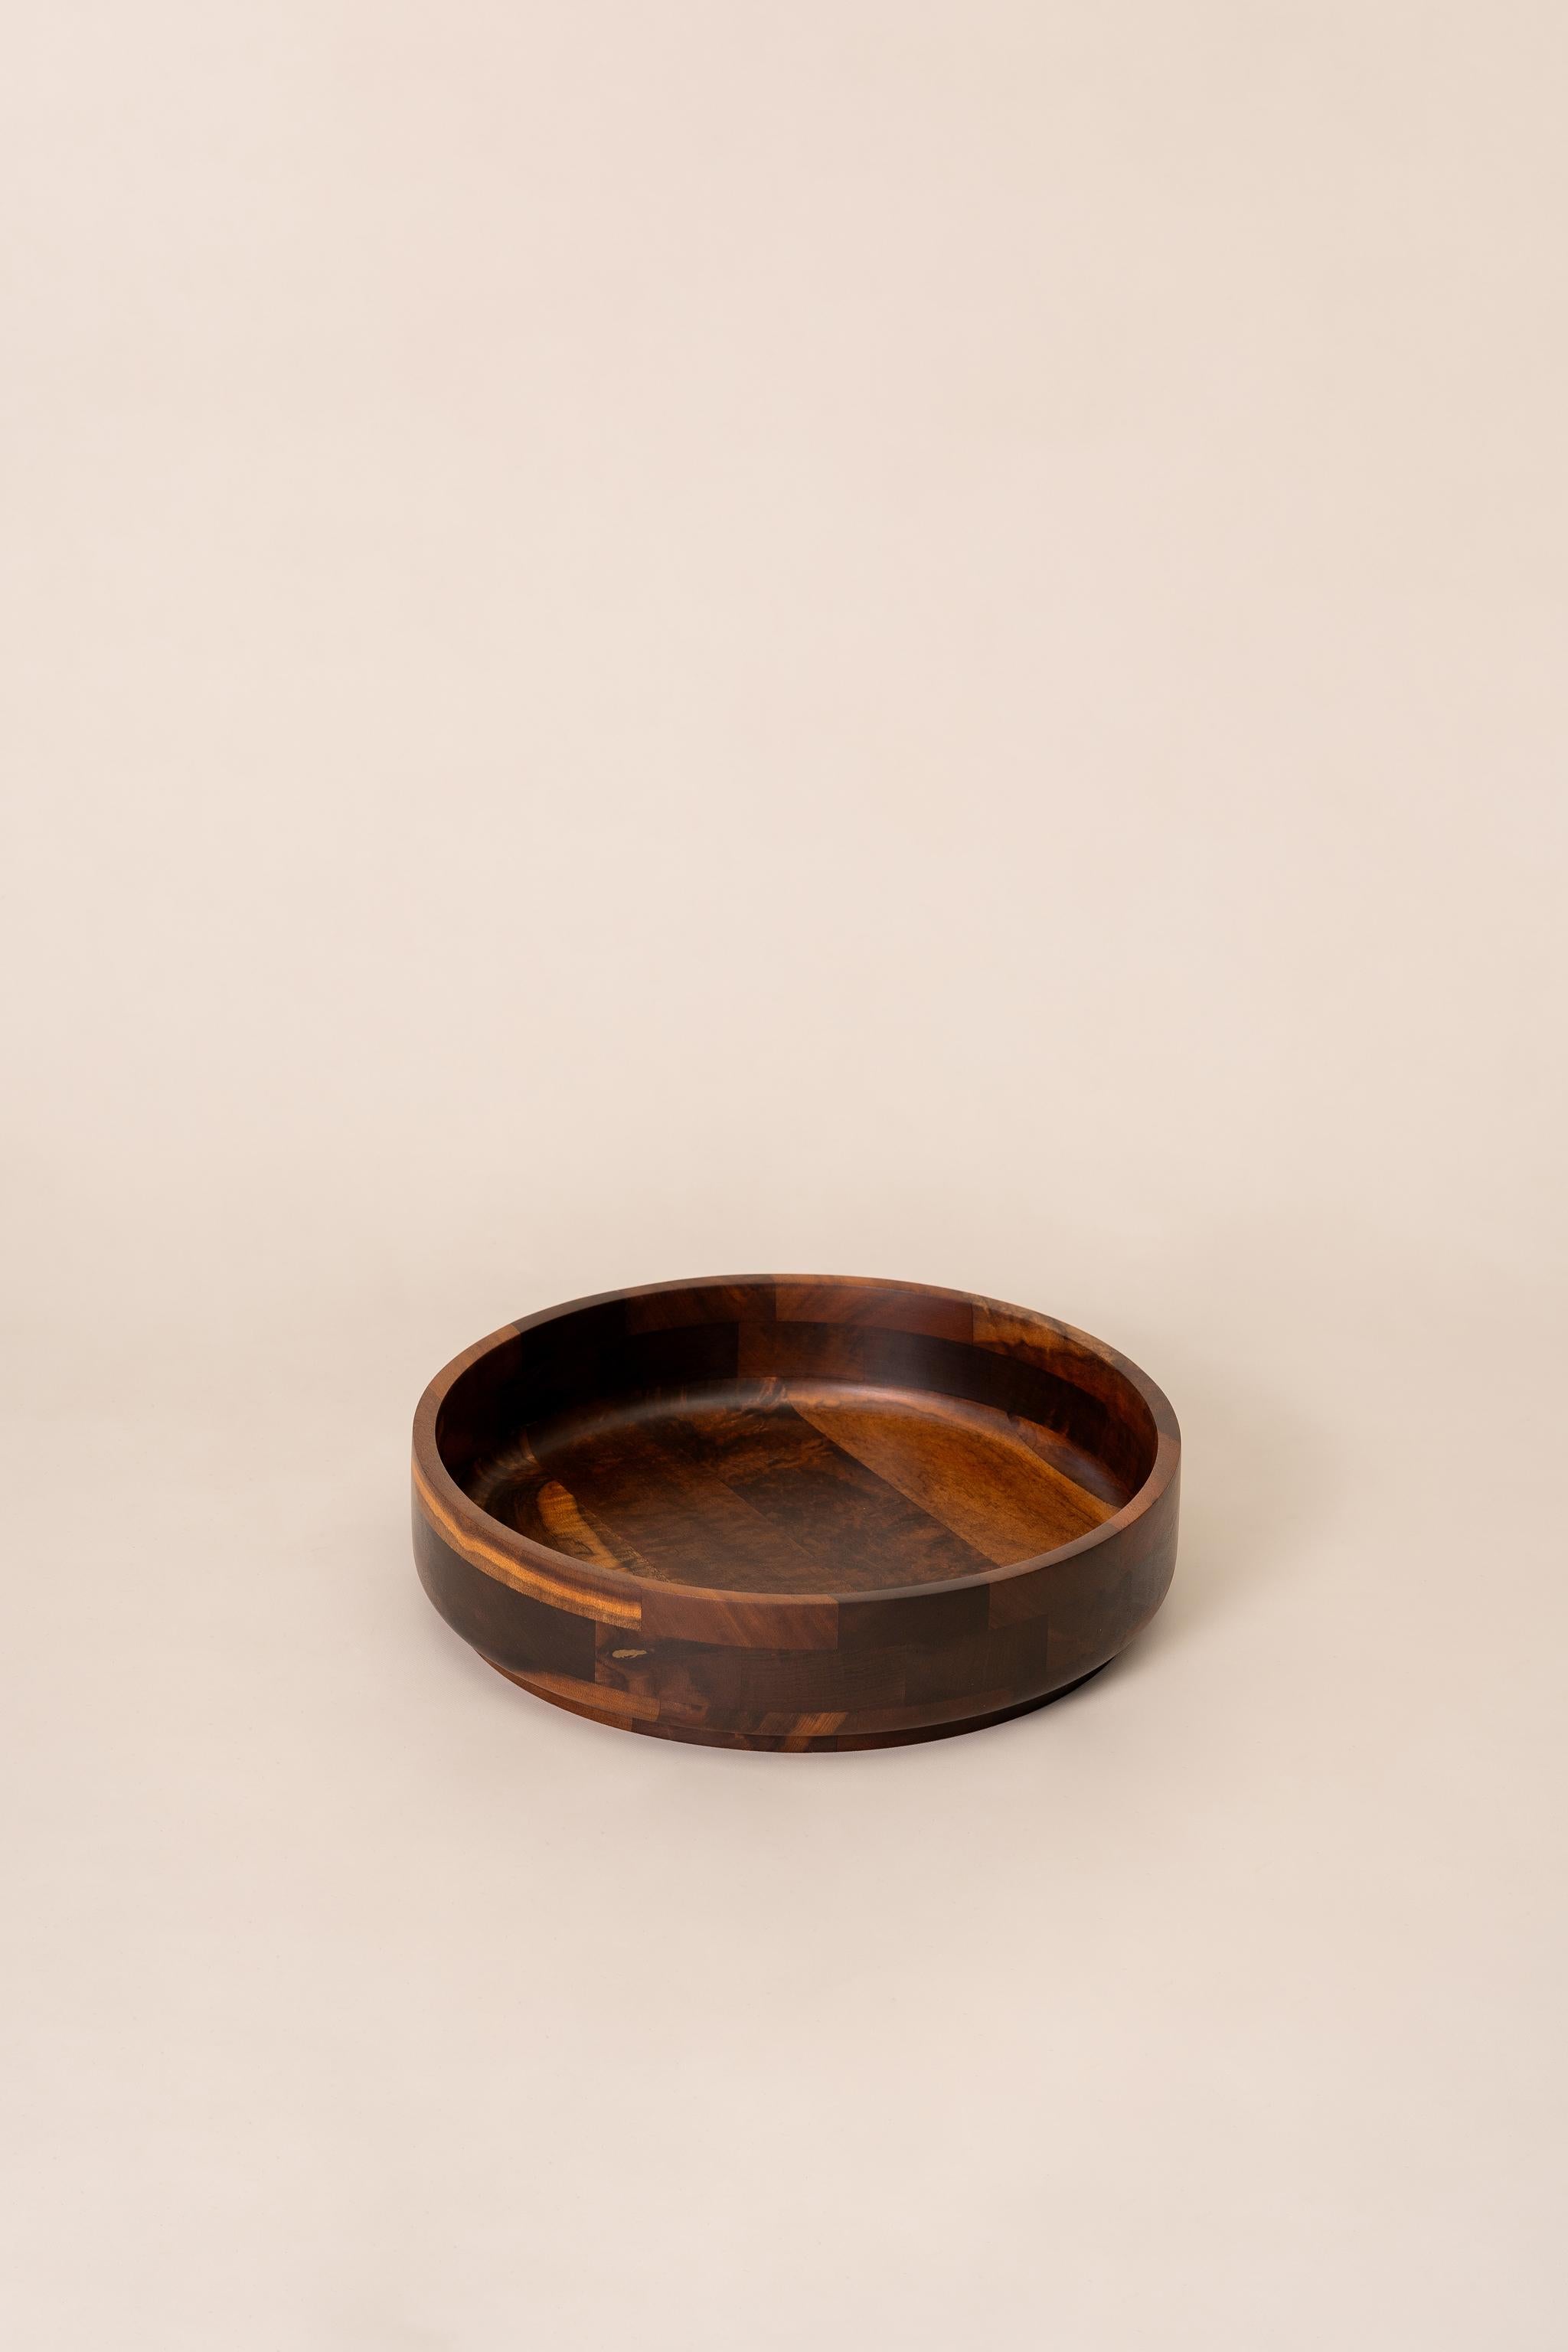 Large and stunning bowl carved in noble wood that can also be used as a centerpiece, designer by Jean Dobré for Tropic-Art. It keeps the manufacturer's mark on the bottom. 

Tropic-Art was a big company that produced utilitarian serving pieces with